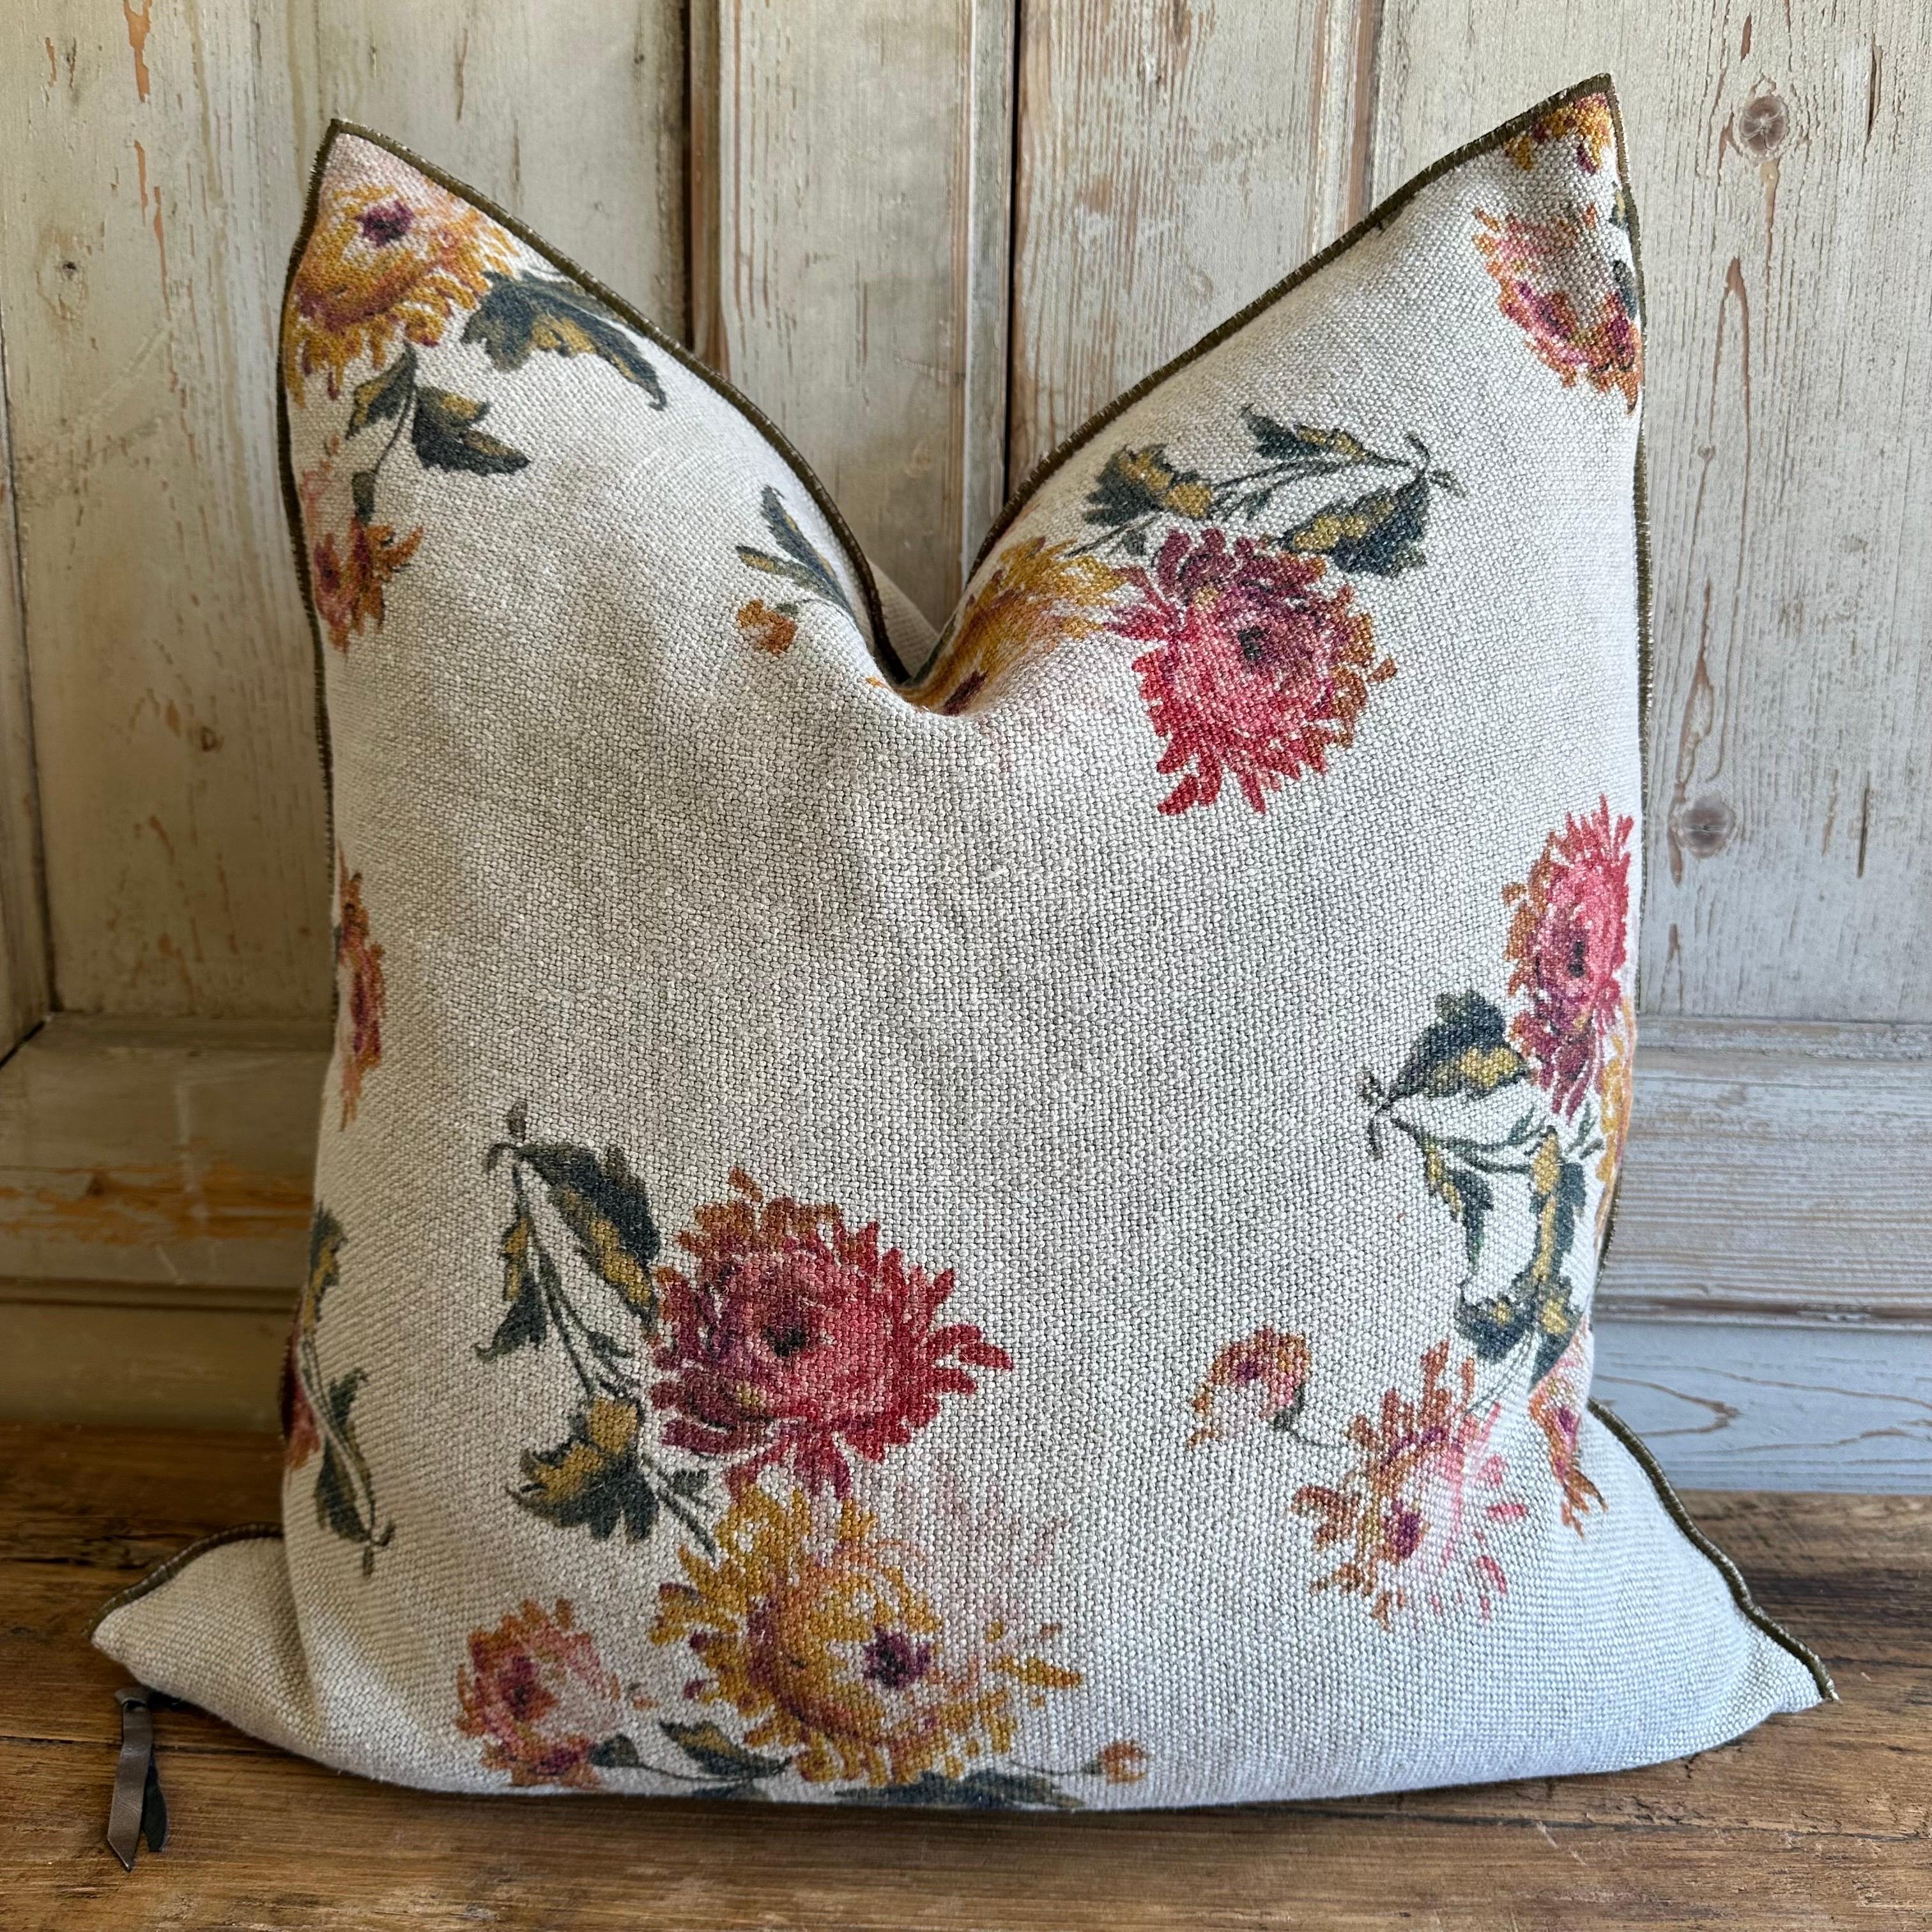 Wabi Sabi Imperial bouquet pillow cover.
Our latest collection has arrived just in time for spring!
On a thick soft nubby textured natural colored linen, with 
gold, and raspberry florals, and deep olive and greens stems.
The overstitched edging